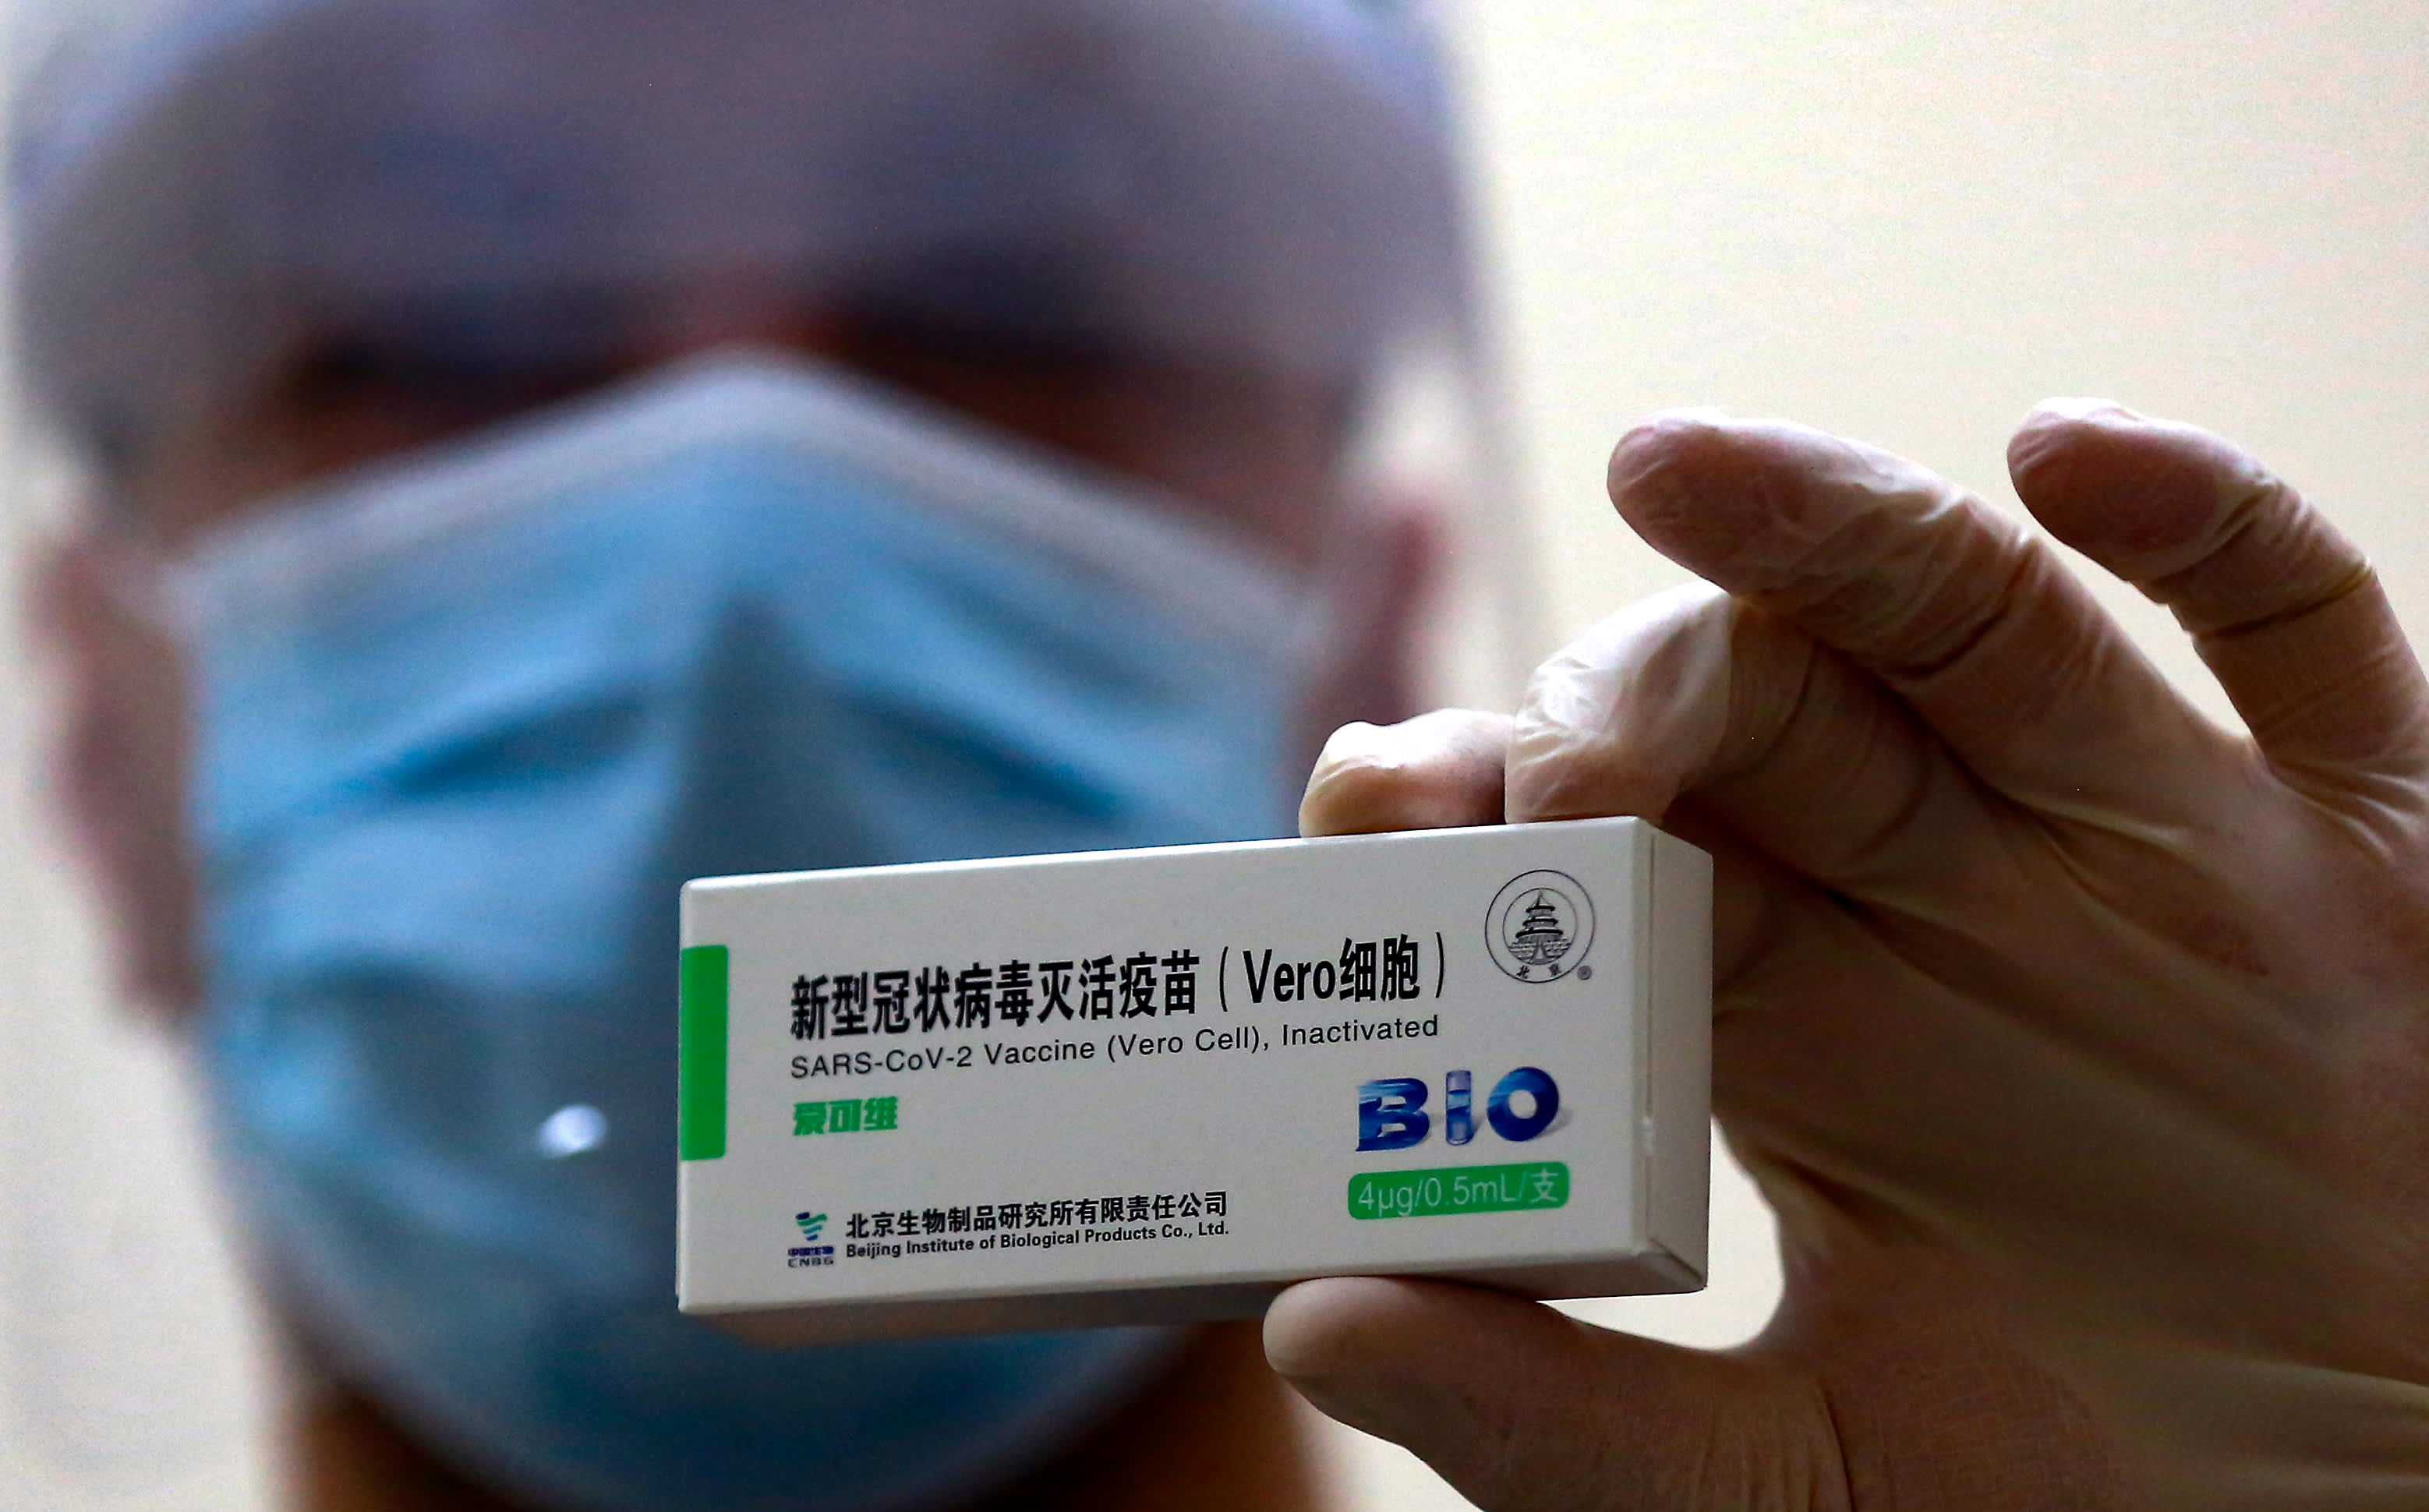 Chinese vaccine maker Sinopharm said the president and a director resigned